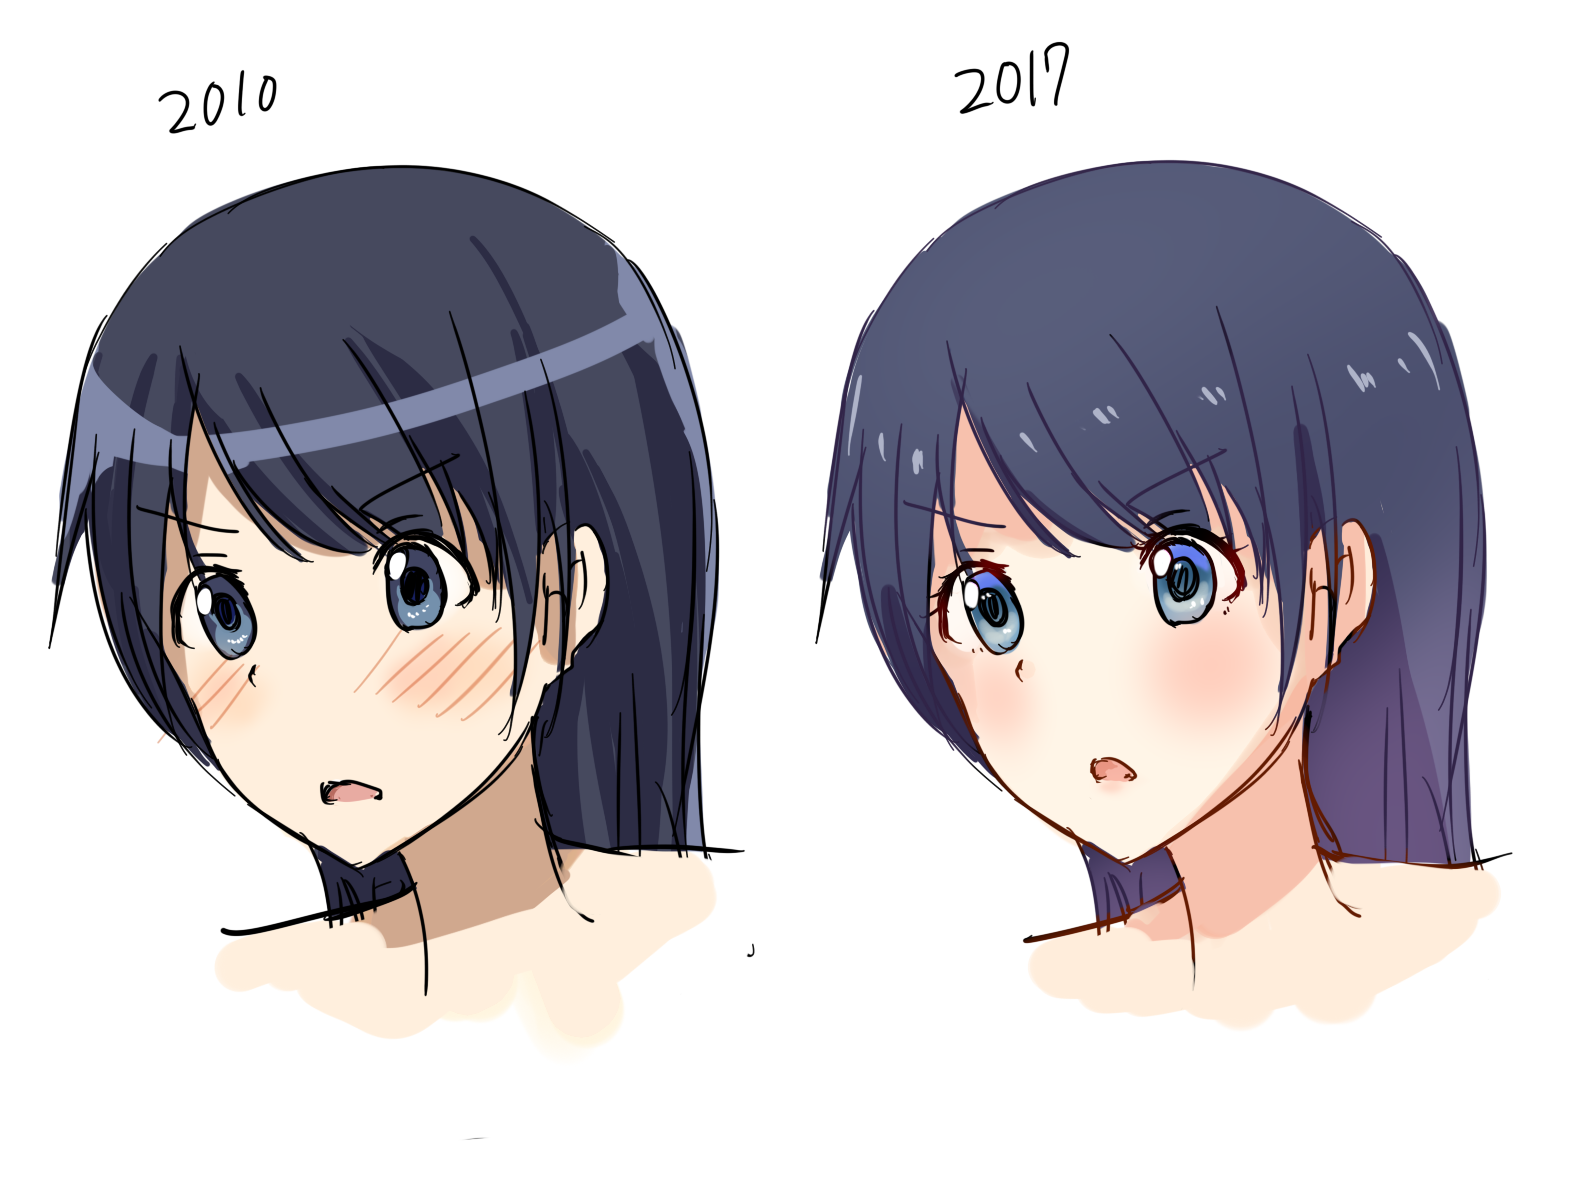 How Anime Art Has Changed Since 2010